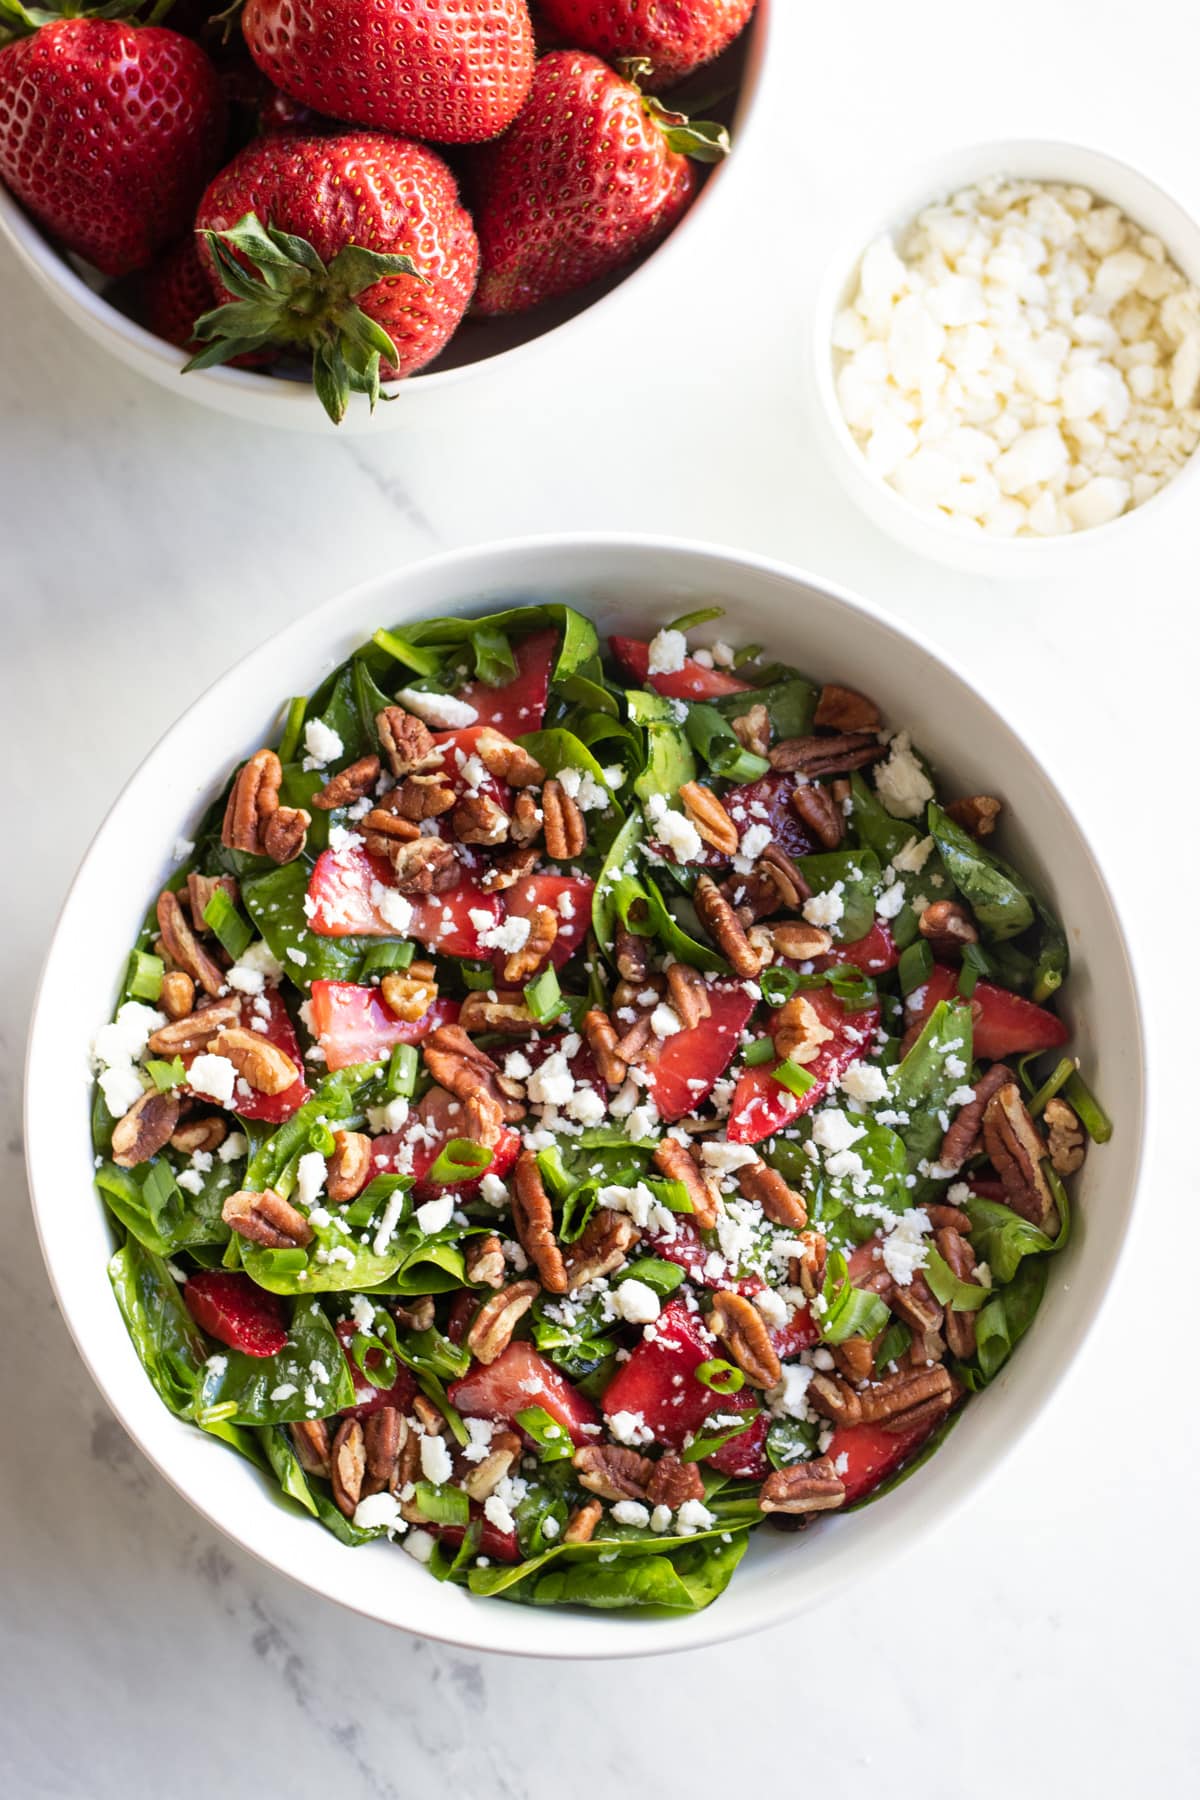 A large white bowl filled with low FODMAP spinach salad with strawberries. There are smaller bowls filled with crumbled feta cheese and whole strawberries sitting next to it.